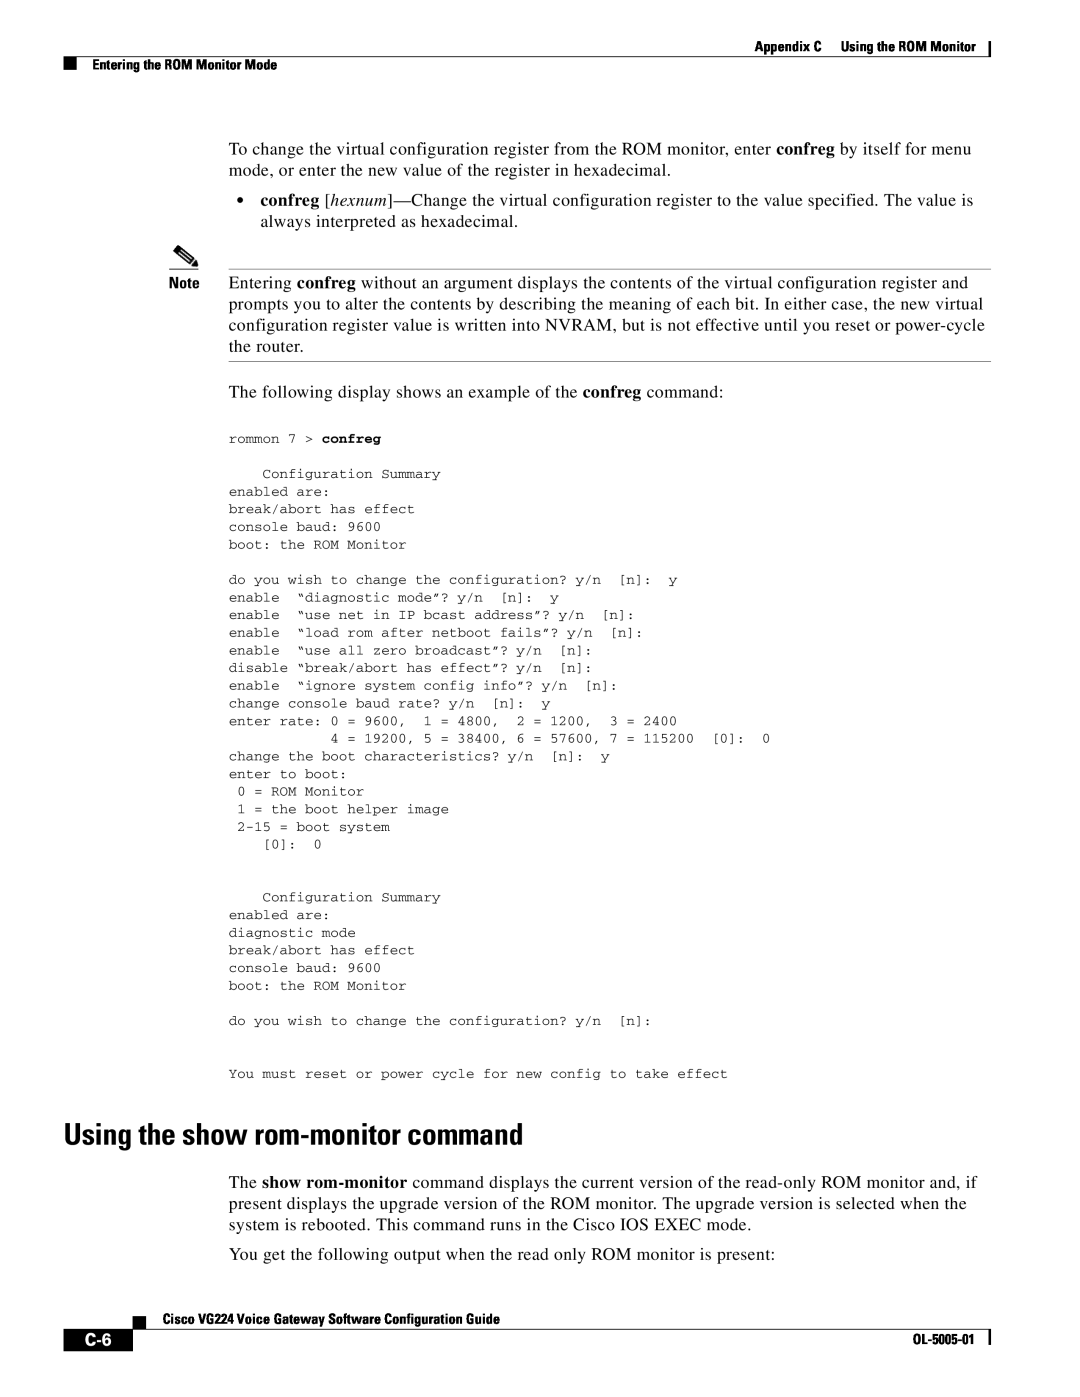 Cisco Systems VG224 manual Using the show rom-monitor command 